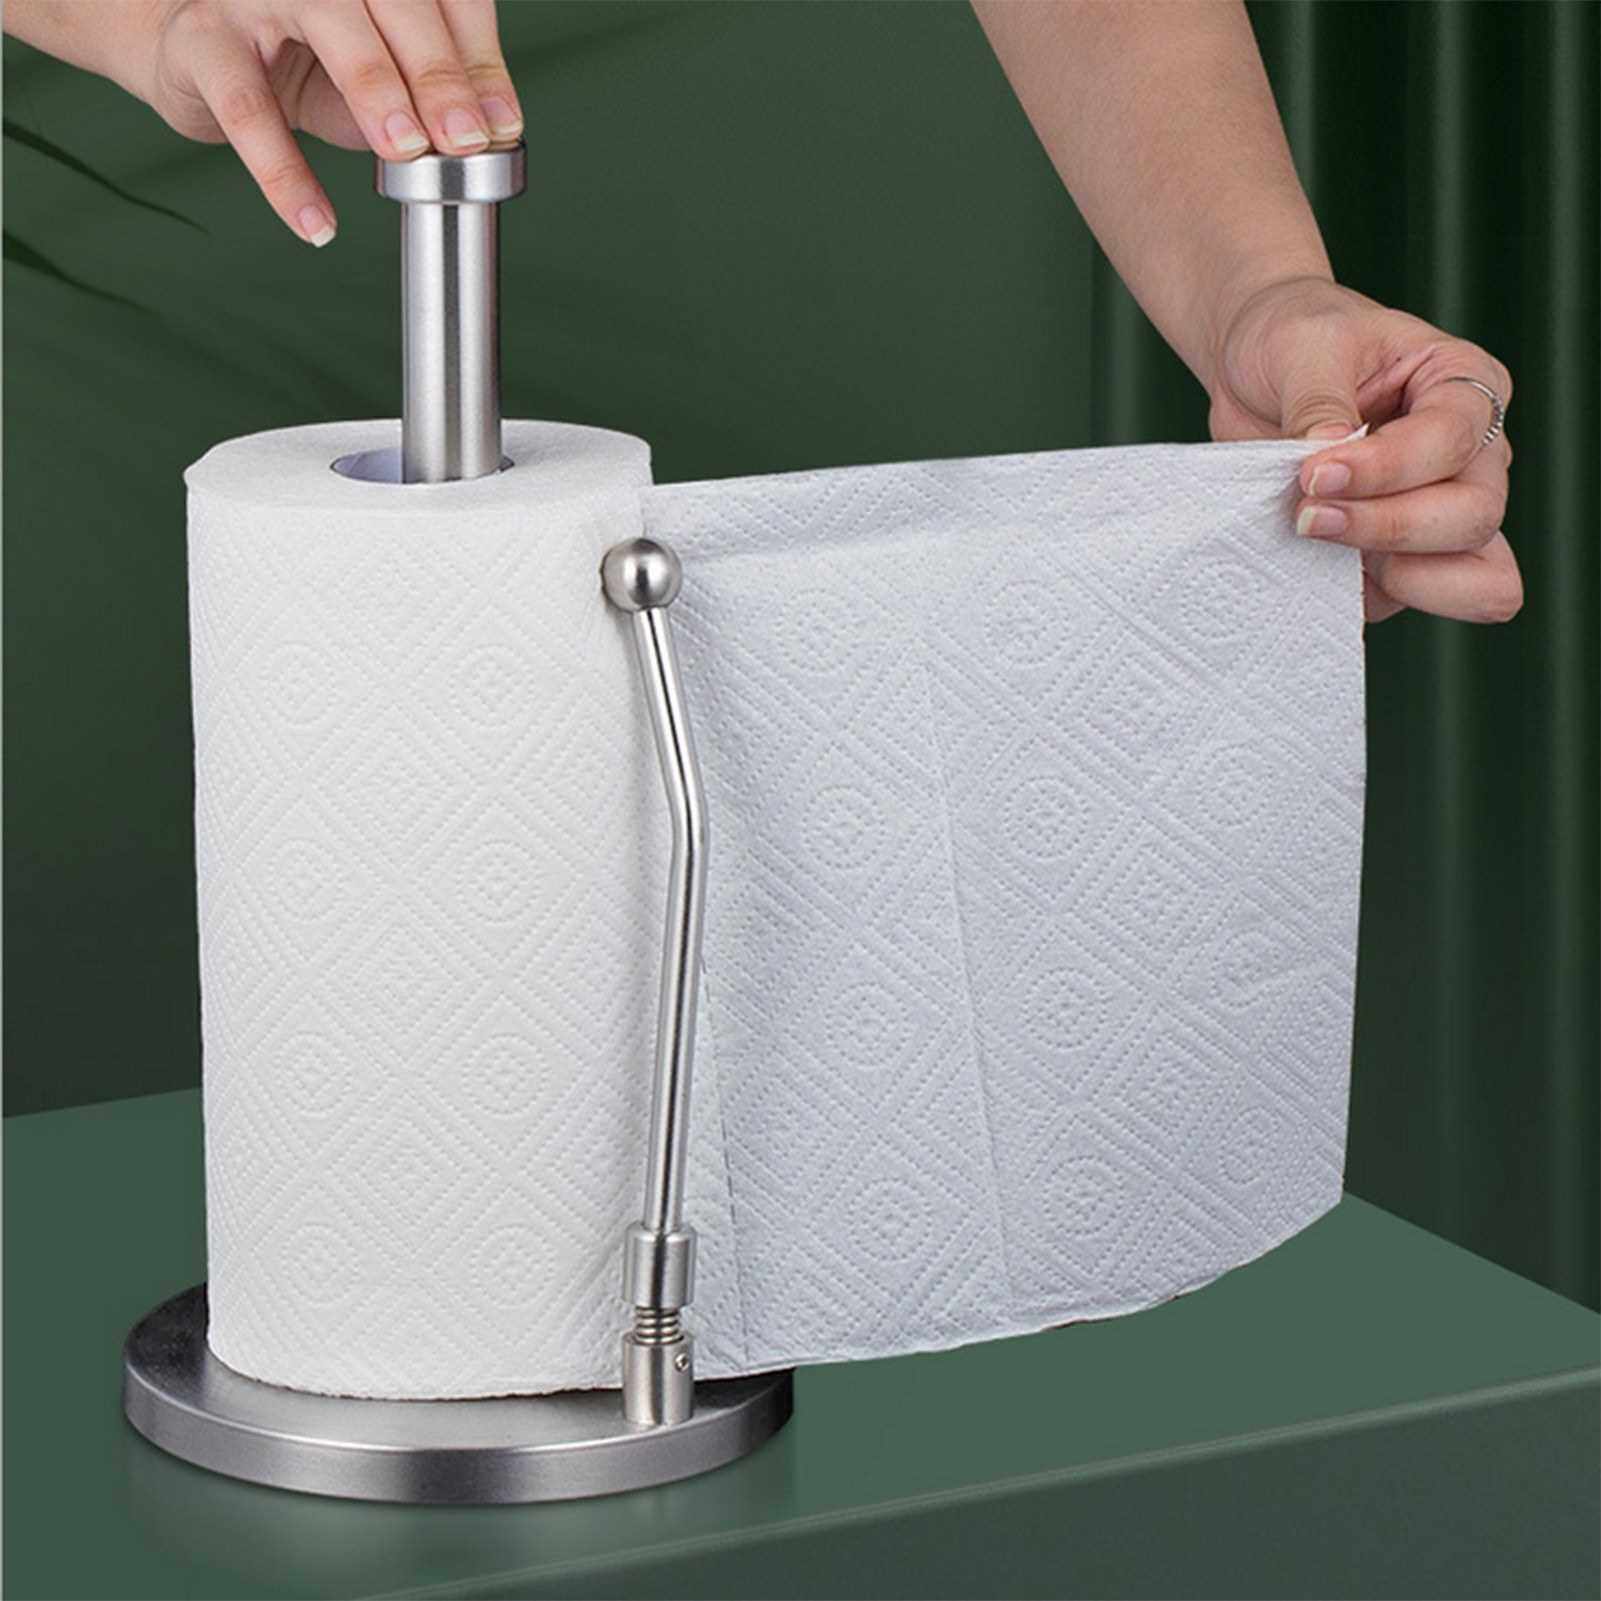 Stainless Steel Paper Towel Holder Standing Paper Towel Organizer Roll Dispenser Spring Loaded Paper Towel Holder for Kitchen Countertop Home Dining Table Silver (Standard)